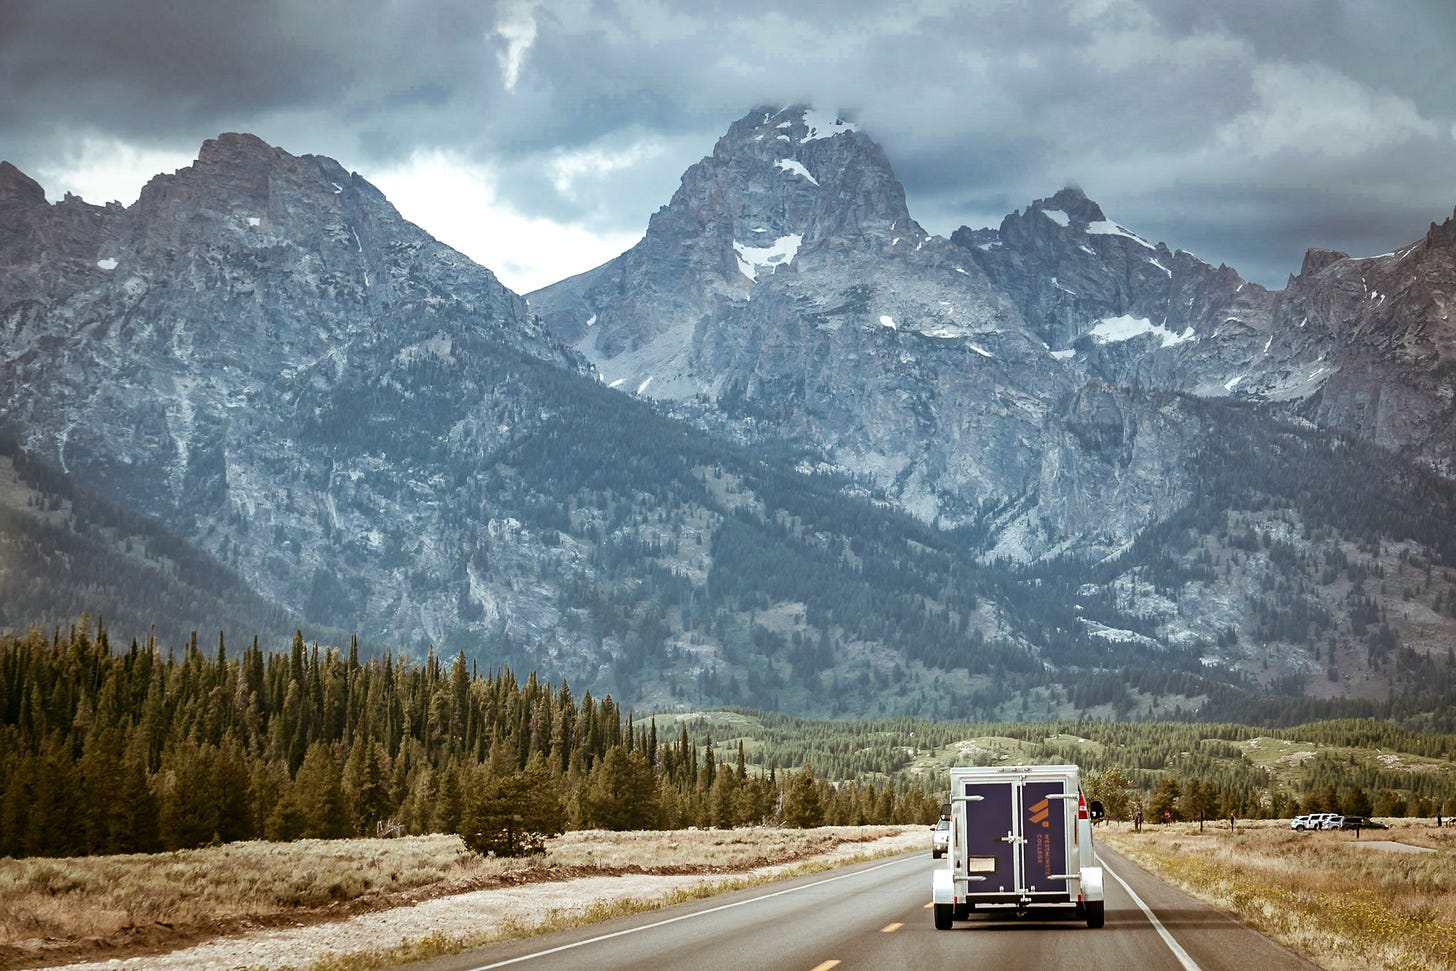 a van travels on a road with the Grand Tetons in the background